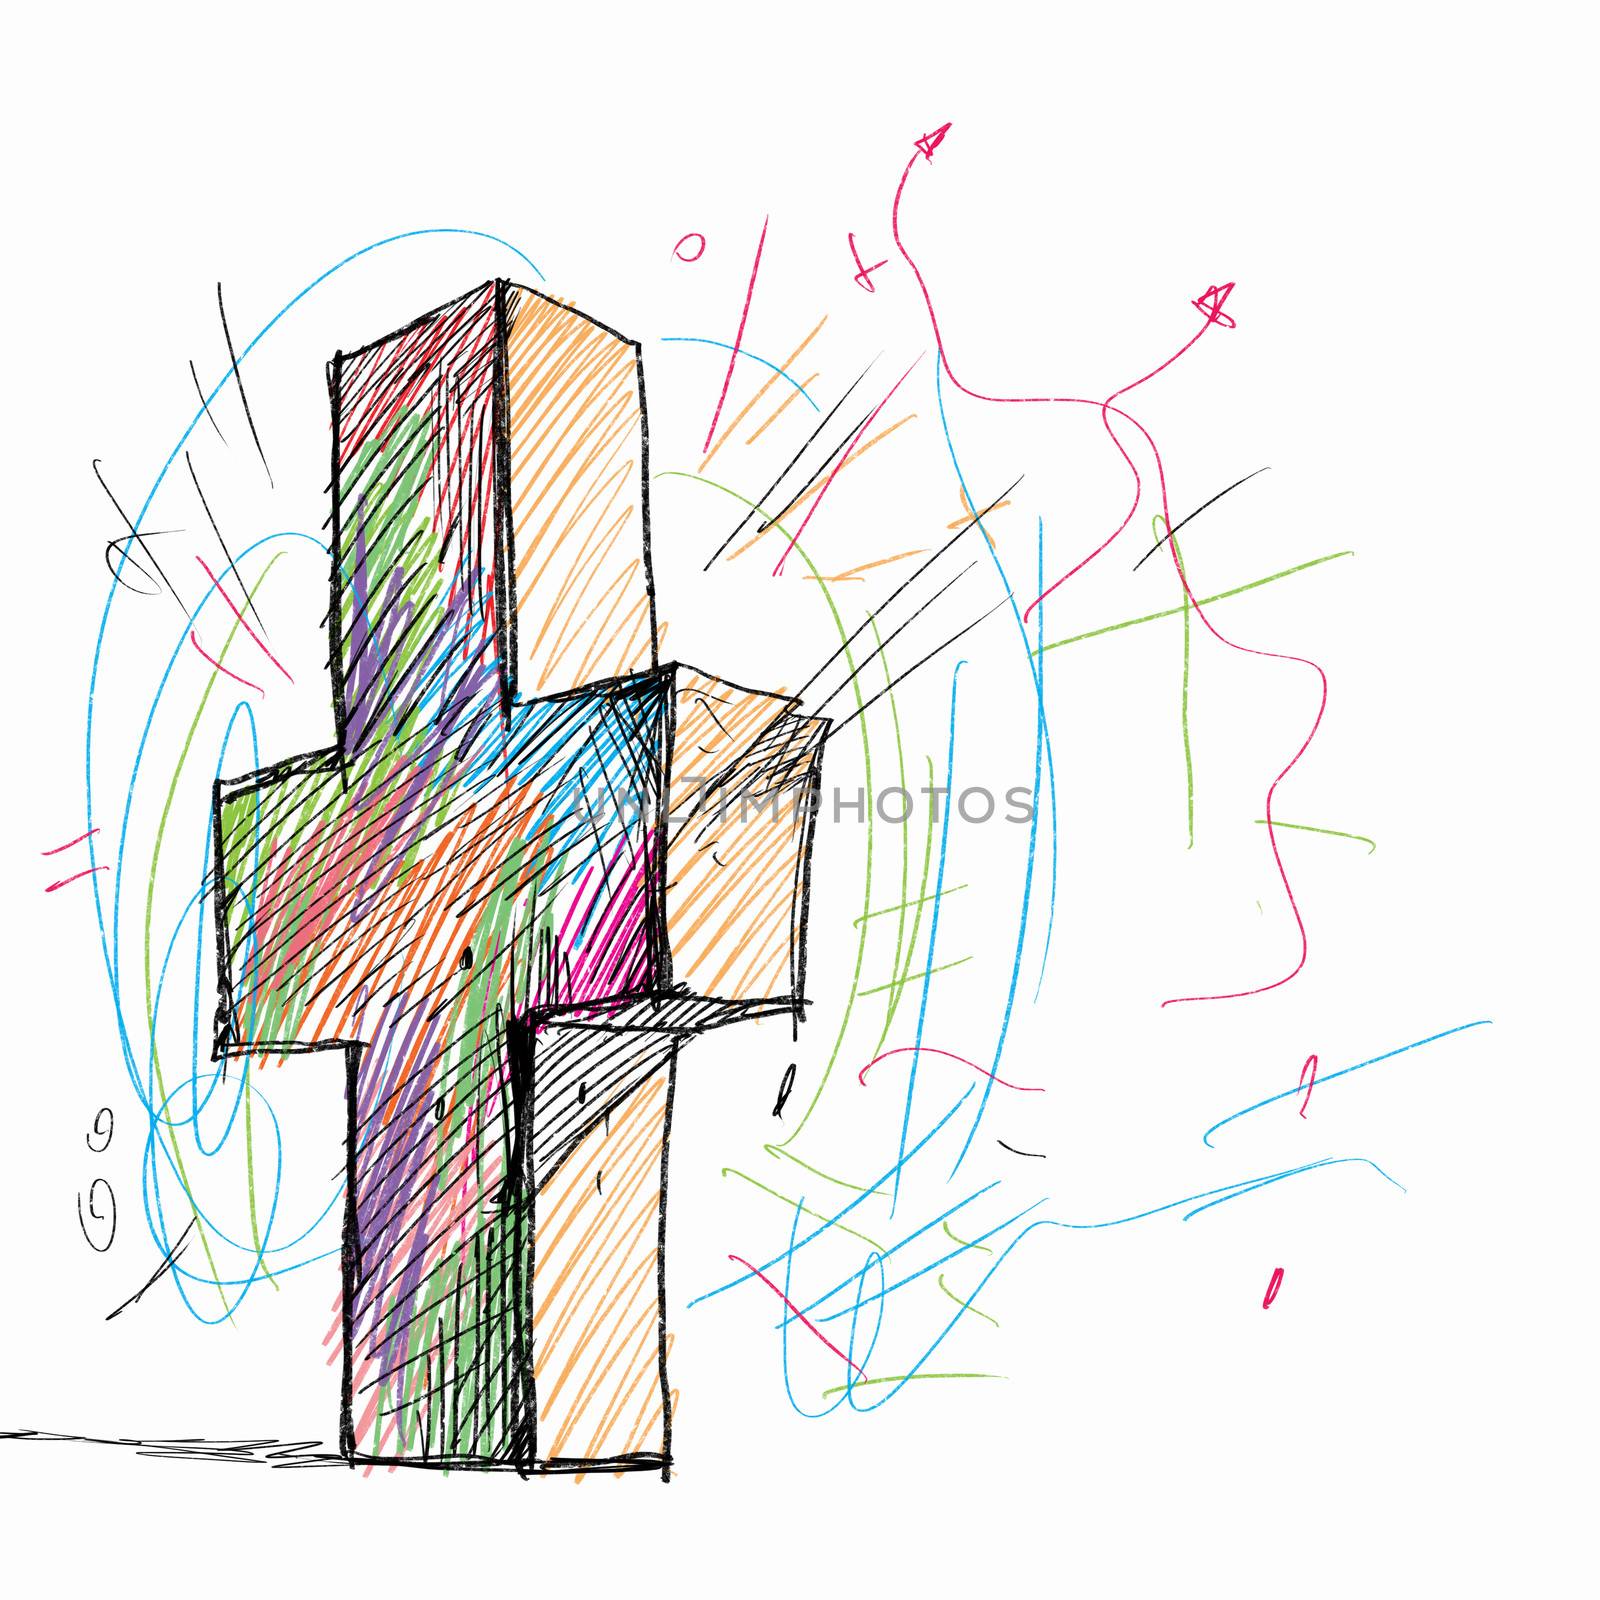 Sketch image of cross against white background